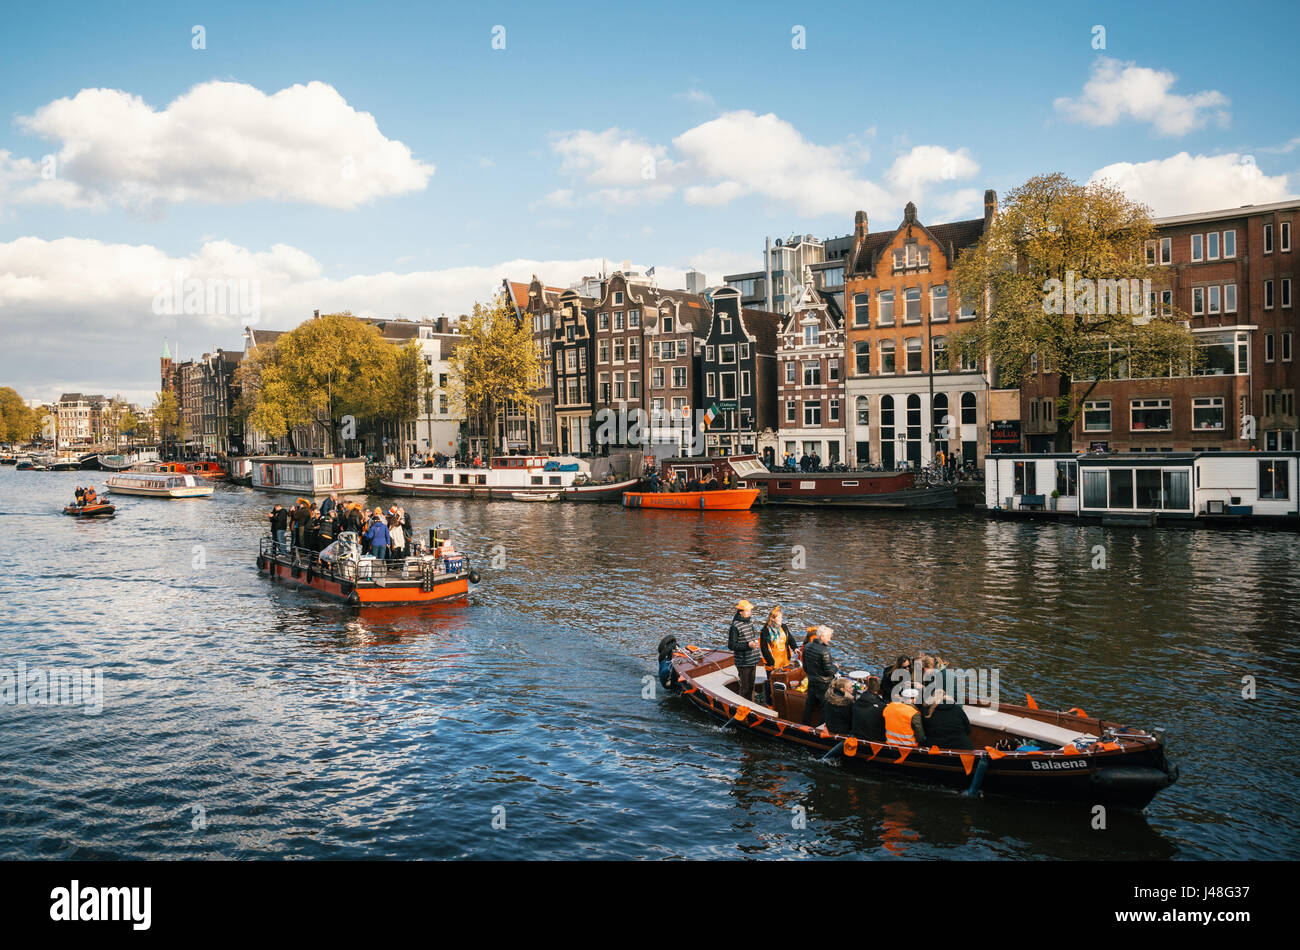 Amsterdam, Netherlands - 25 April, 2017: Local people and tourists dressed in orange clothes ride on boats and participate in celebrating King's Day Stock Photo